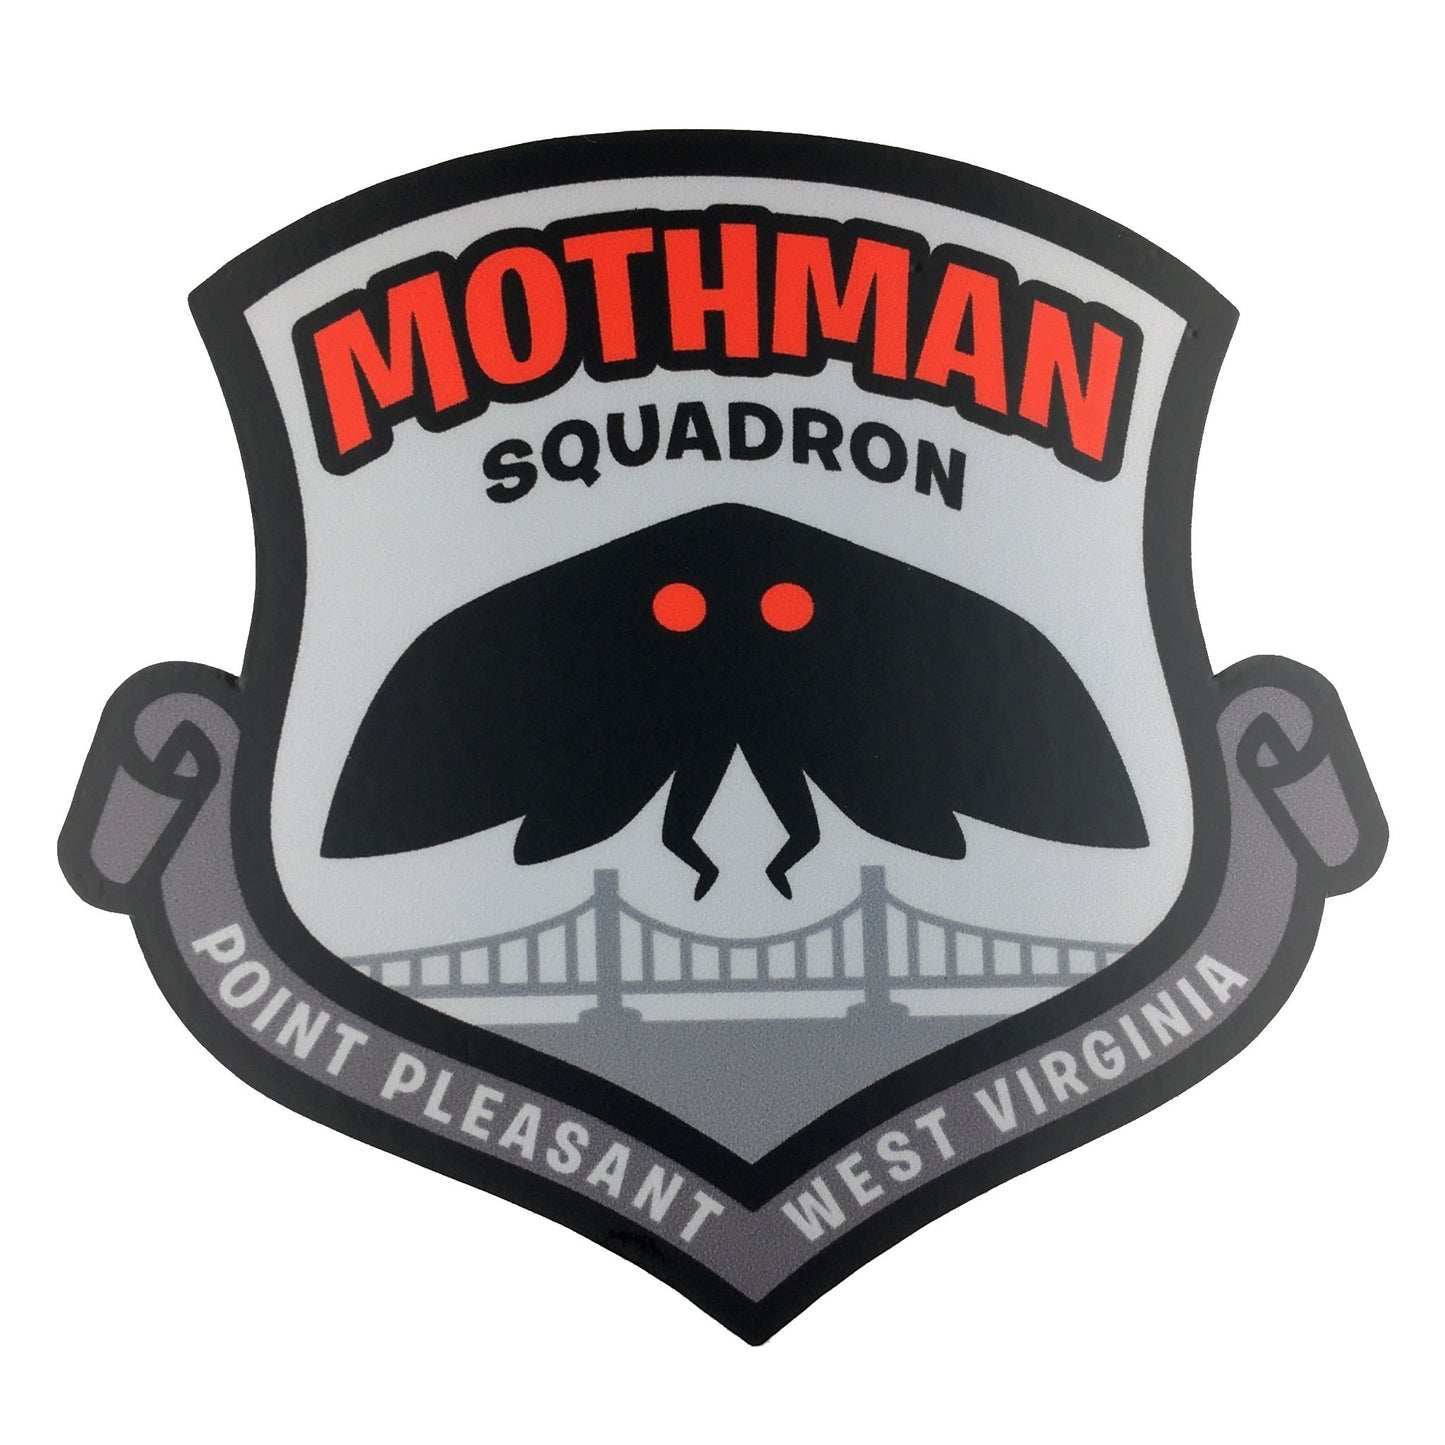 Mothman Squadron military insignia cryptozoology sticker by Monsterologist